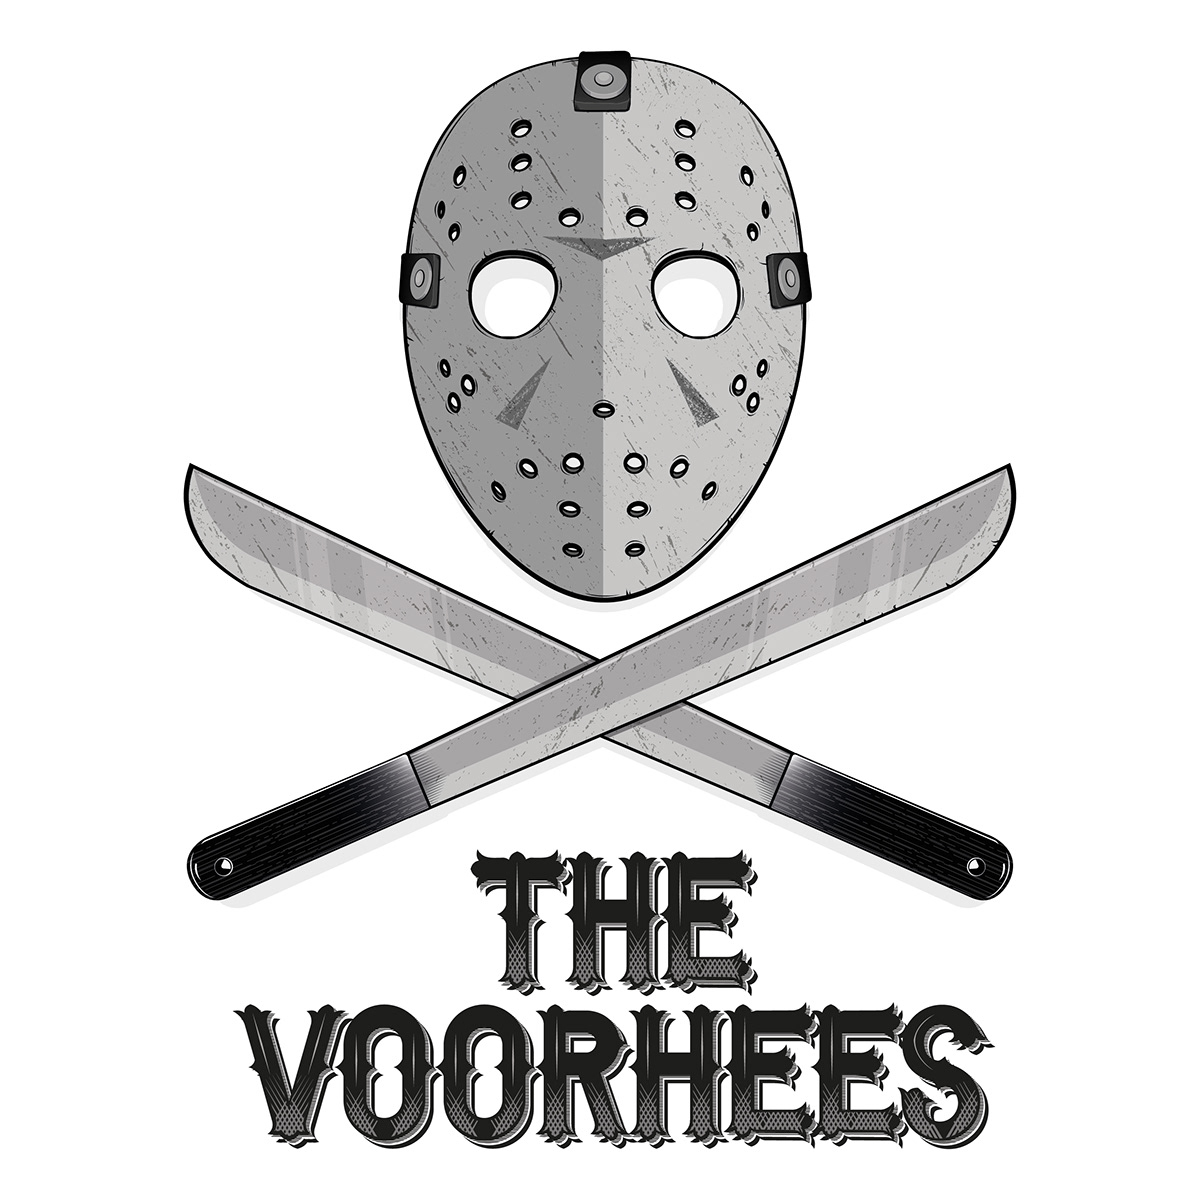 rock jason logo band friday 13th vector black and white knife pirate Movies slasher Jason Voorhees